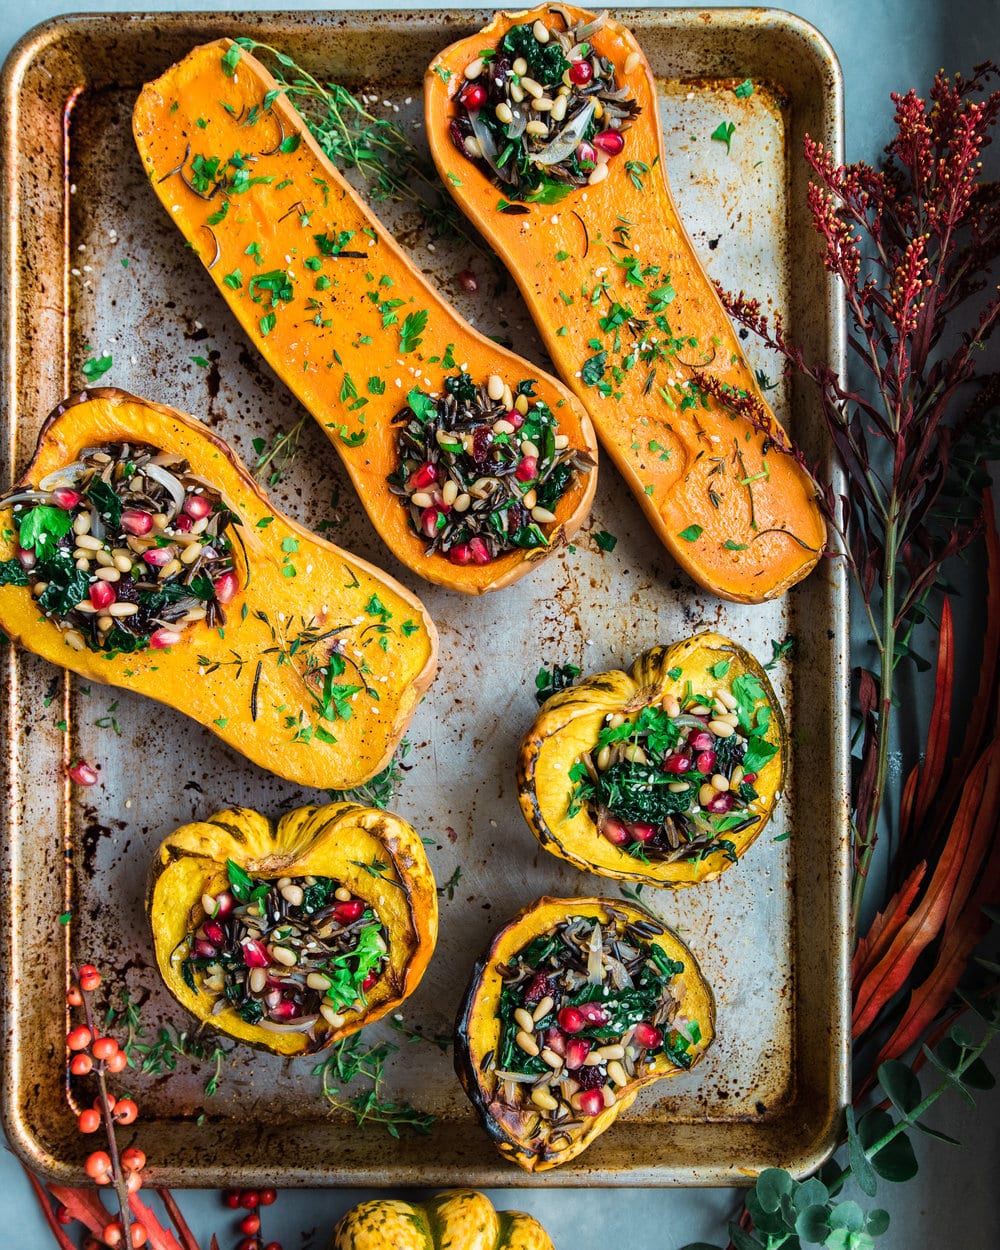 Six squash halves stuffed with wild rice mixture on a baking tray.